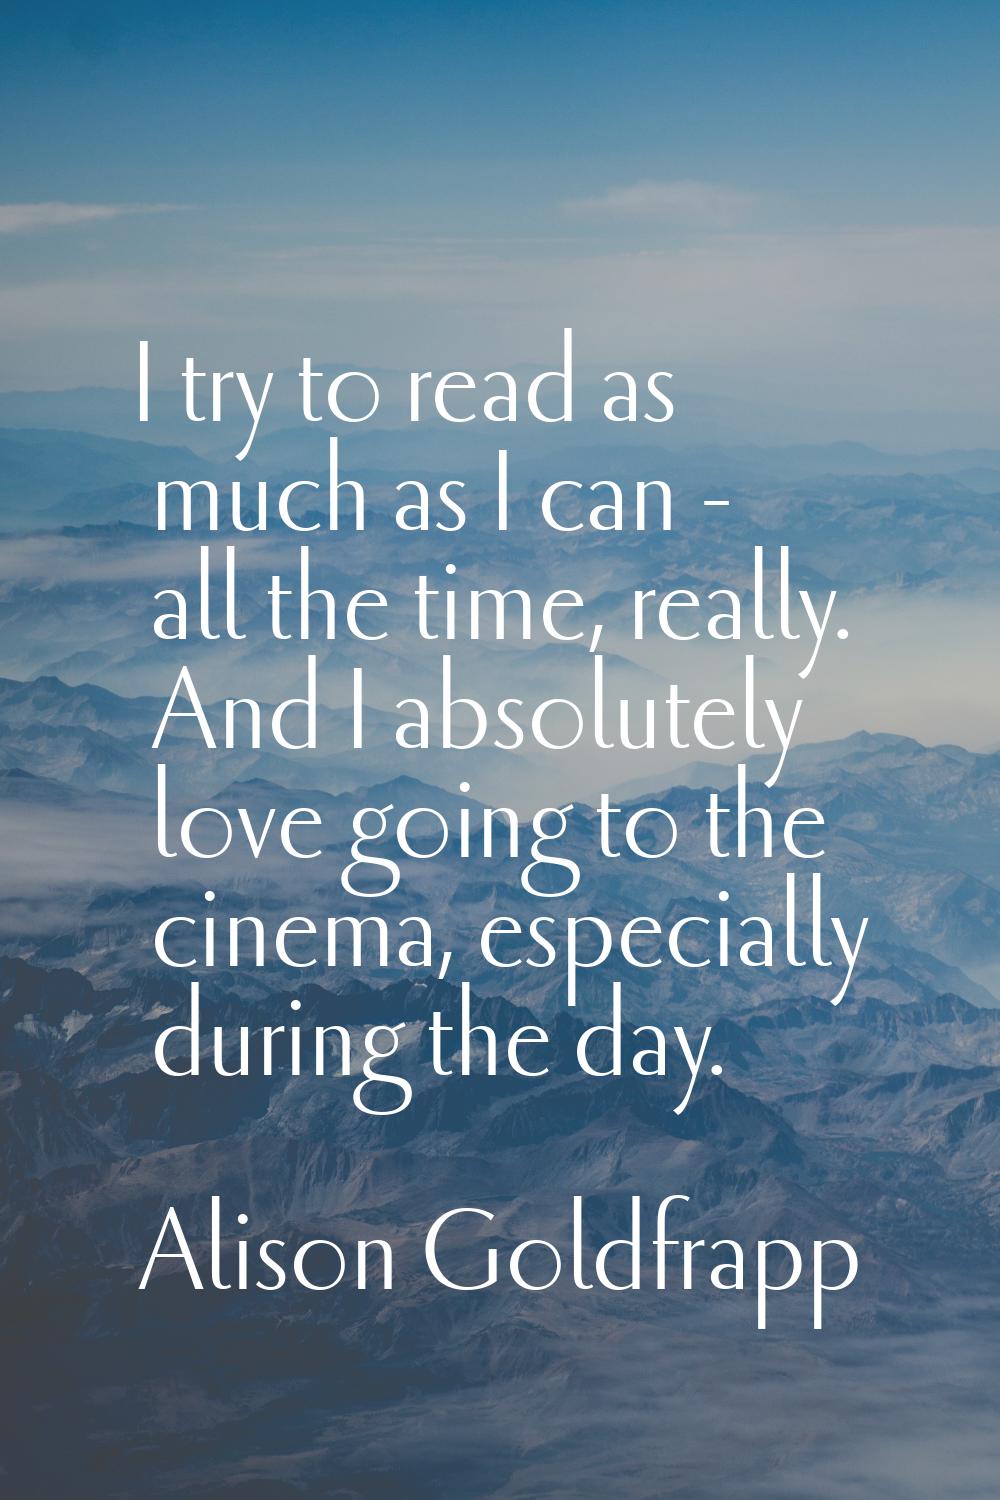 I try to read as much as I can - all the time, really. And I absolutely love going to the cinema, e